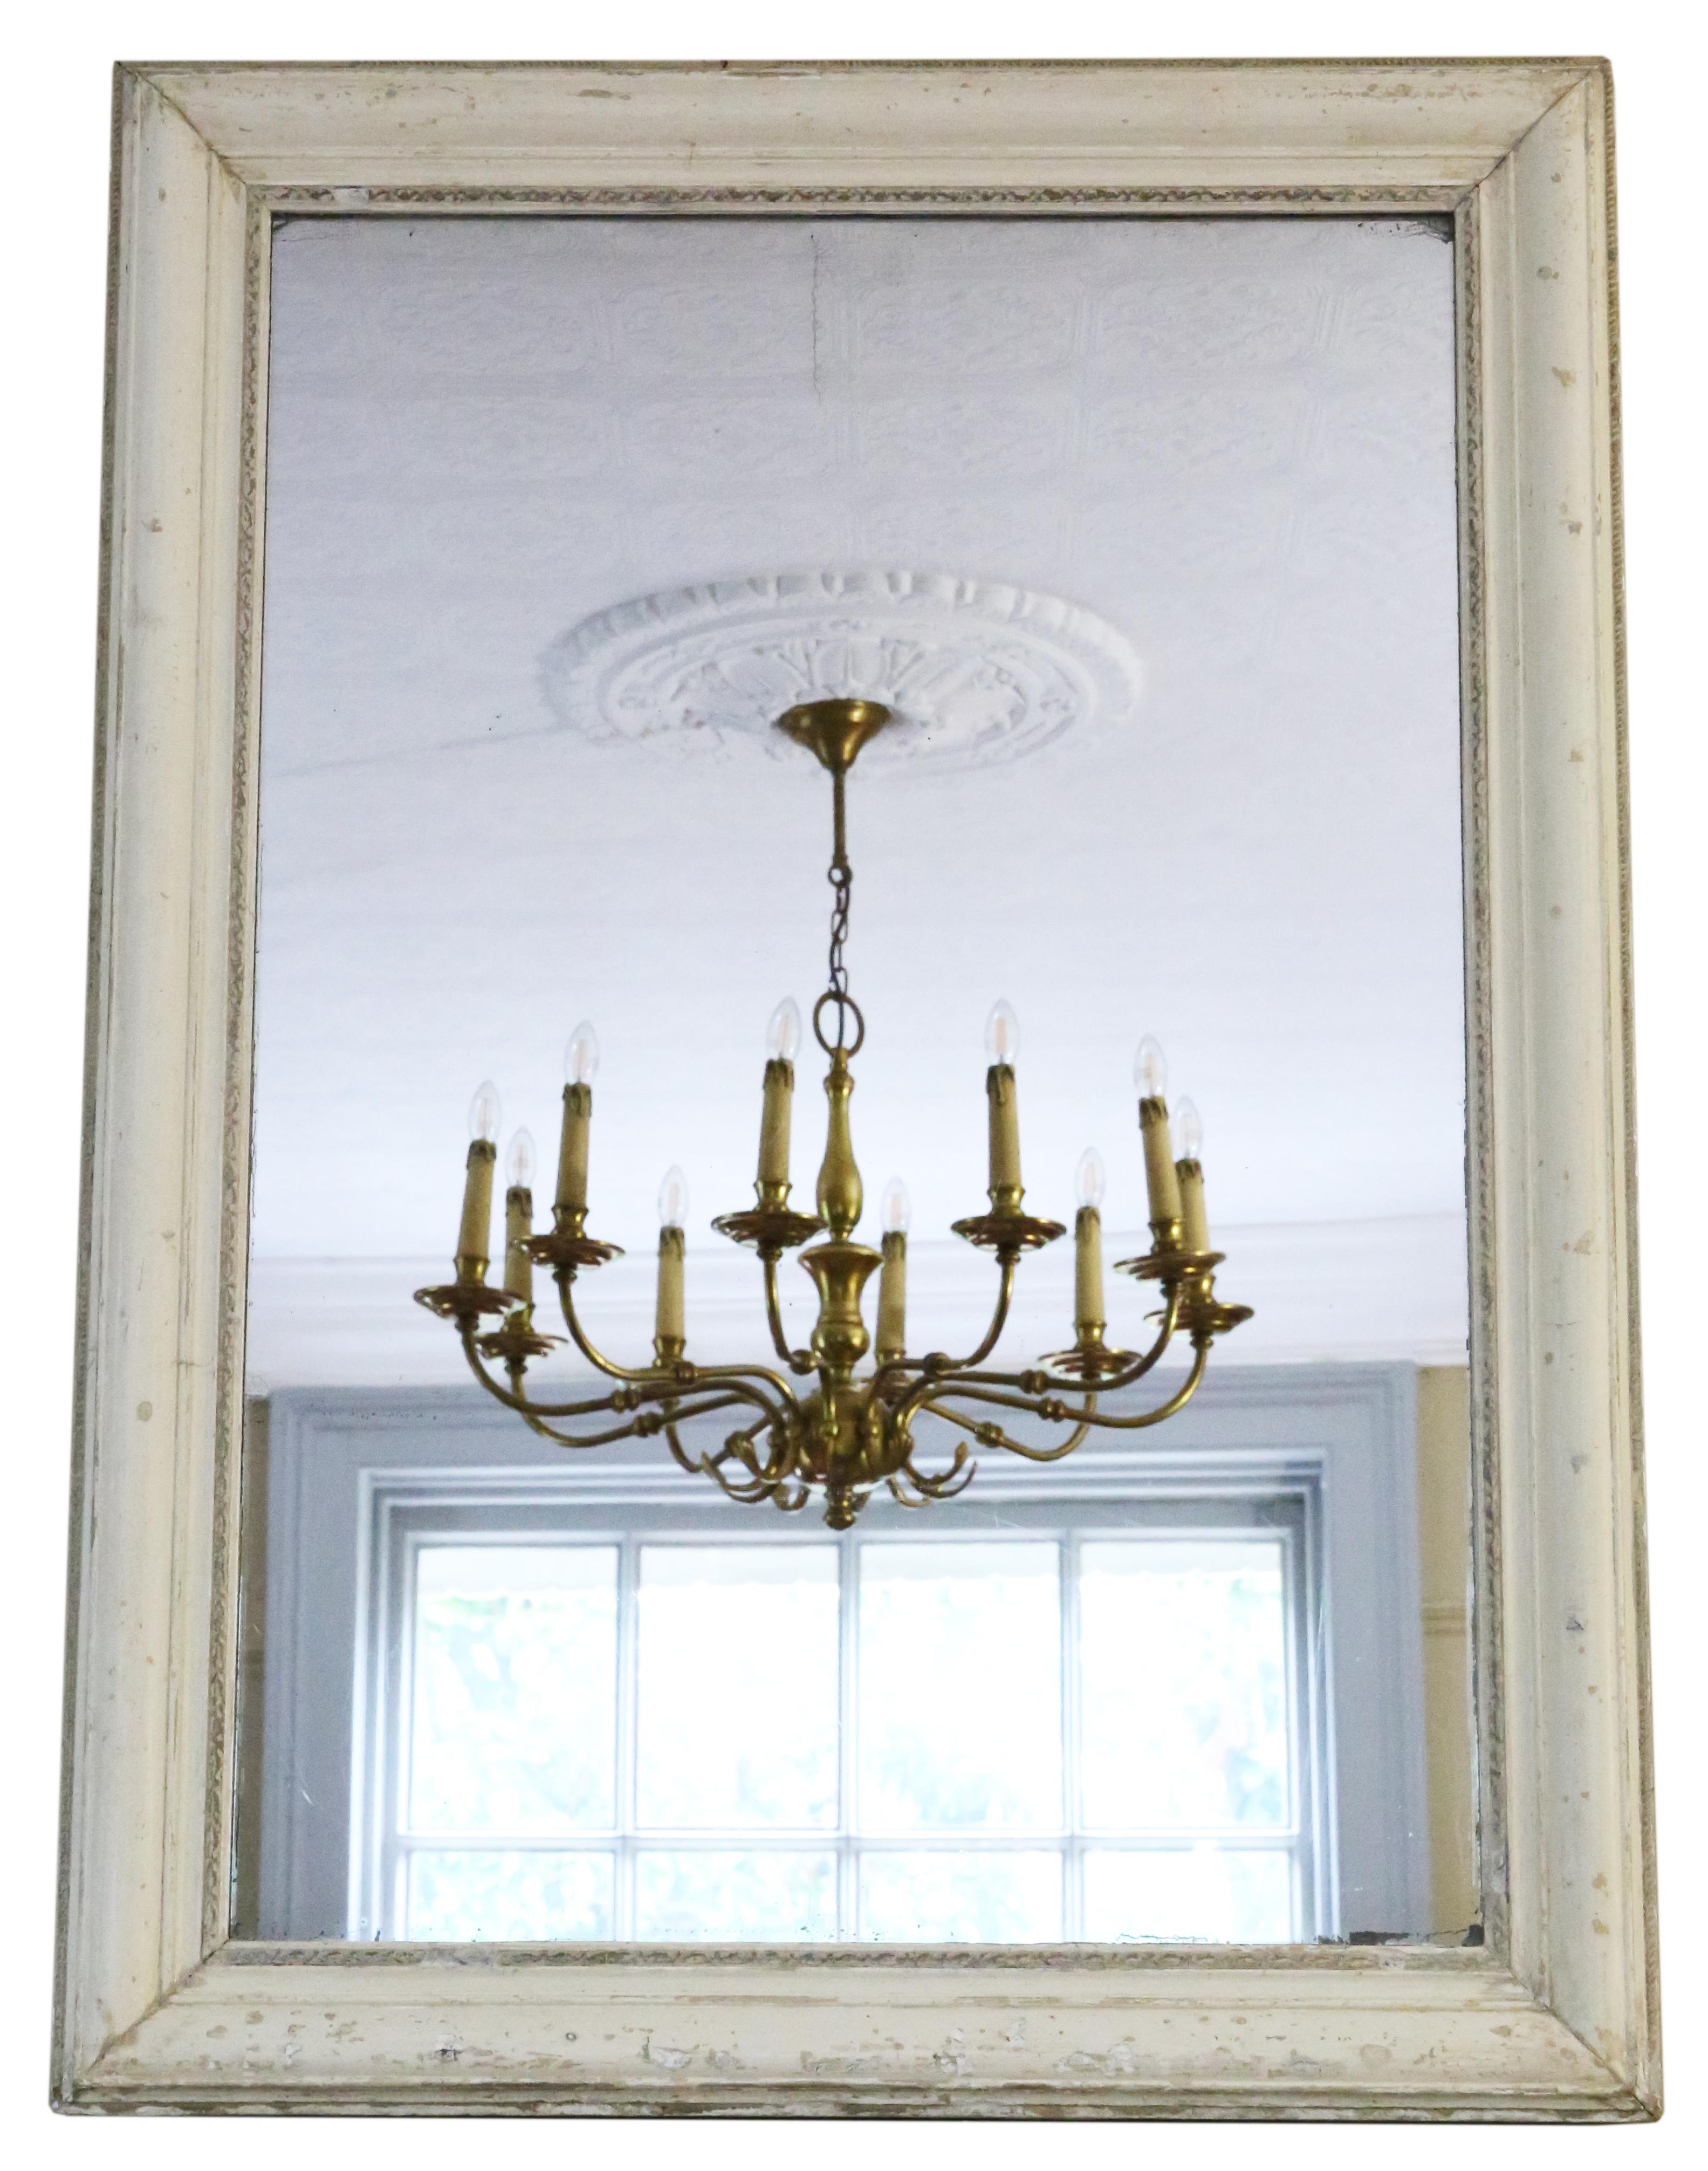 Antique large quality painted wall or overmantle mirror, 19th Century. Could be hung in portrait or landscape.

An impressive rare find, that would look amazing in the right location. No loose joints or woodworm.

The original mirrored glass has